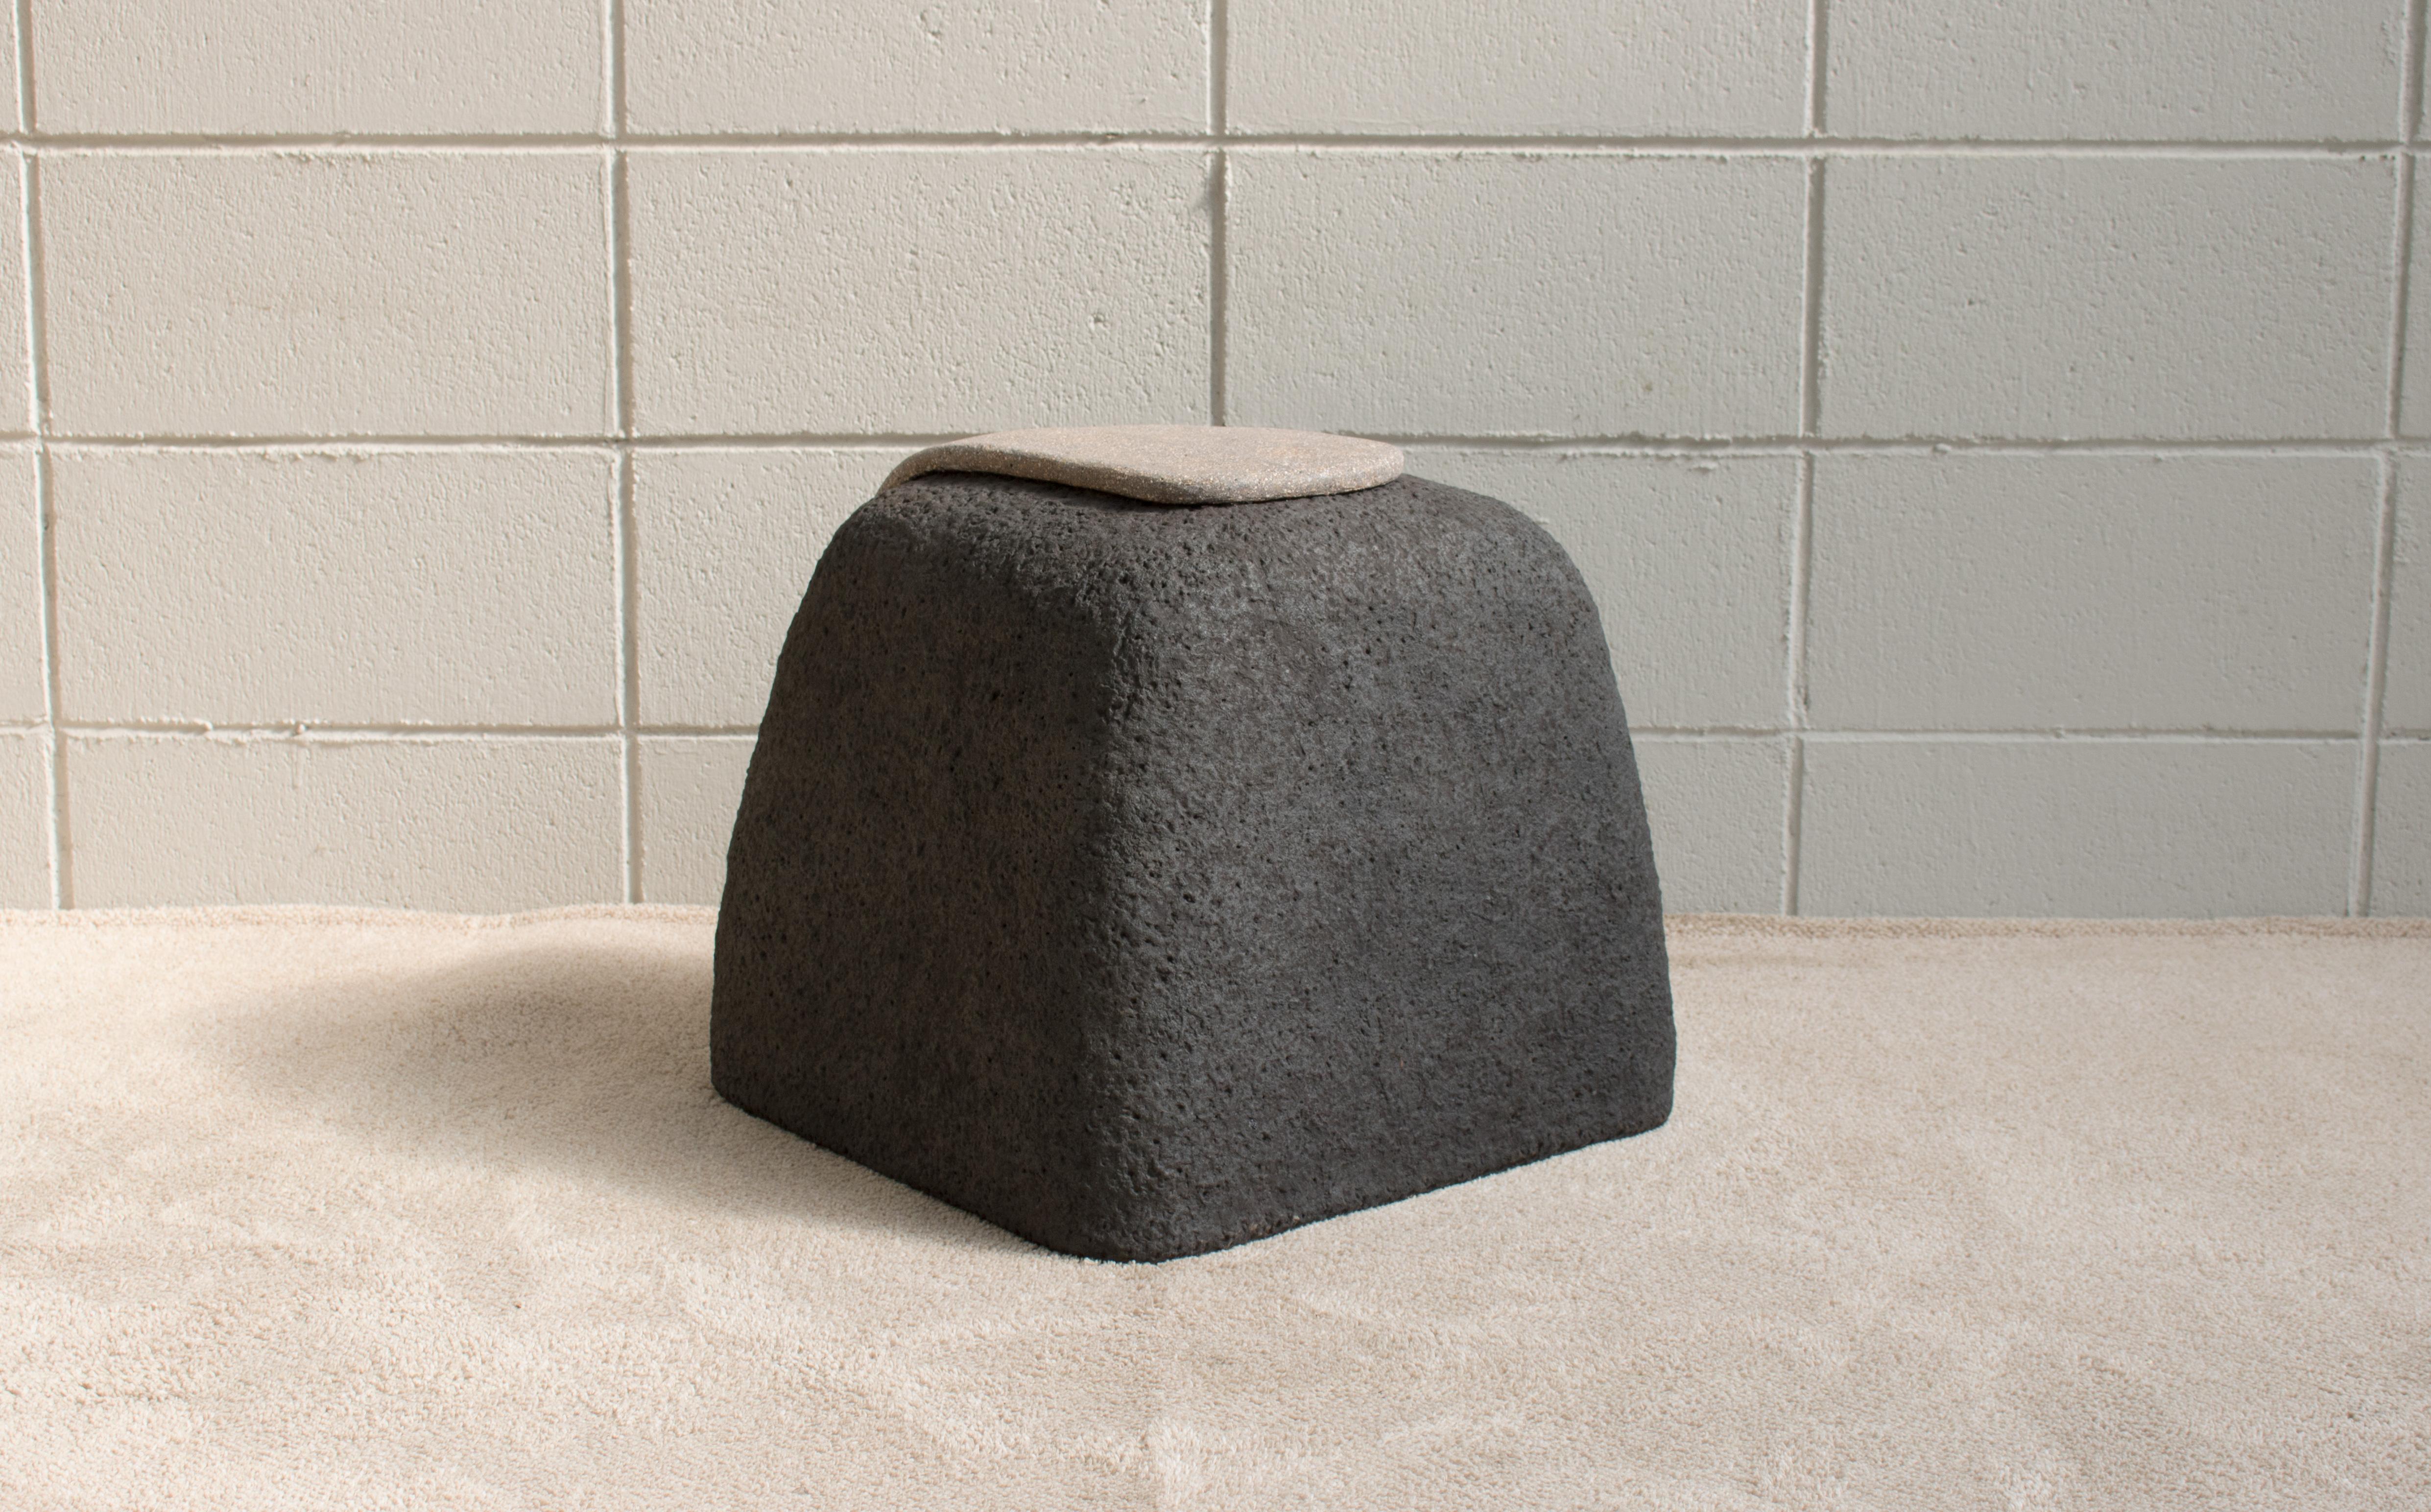 A stool with the touch of the stone texture. The clay was piled up in a basic manner, and the stone was stamped on the clay using a real stone to express the texture of the soil. The work was carried out only through the process of the firing so